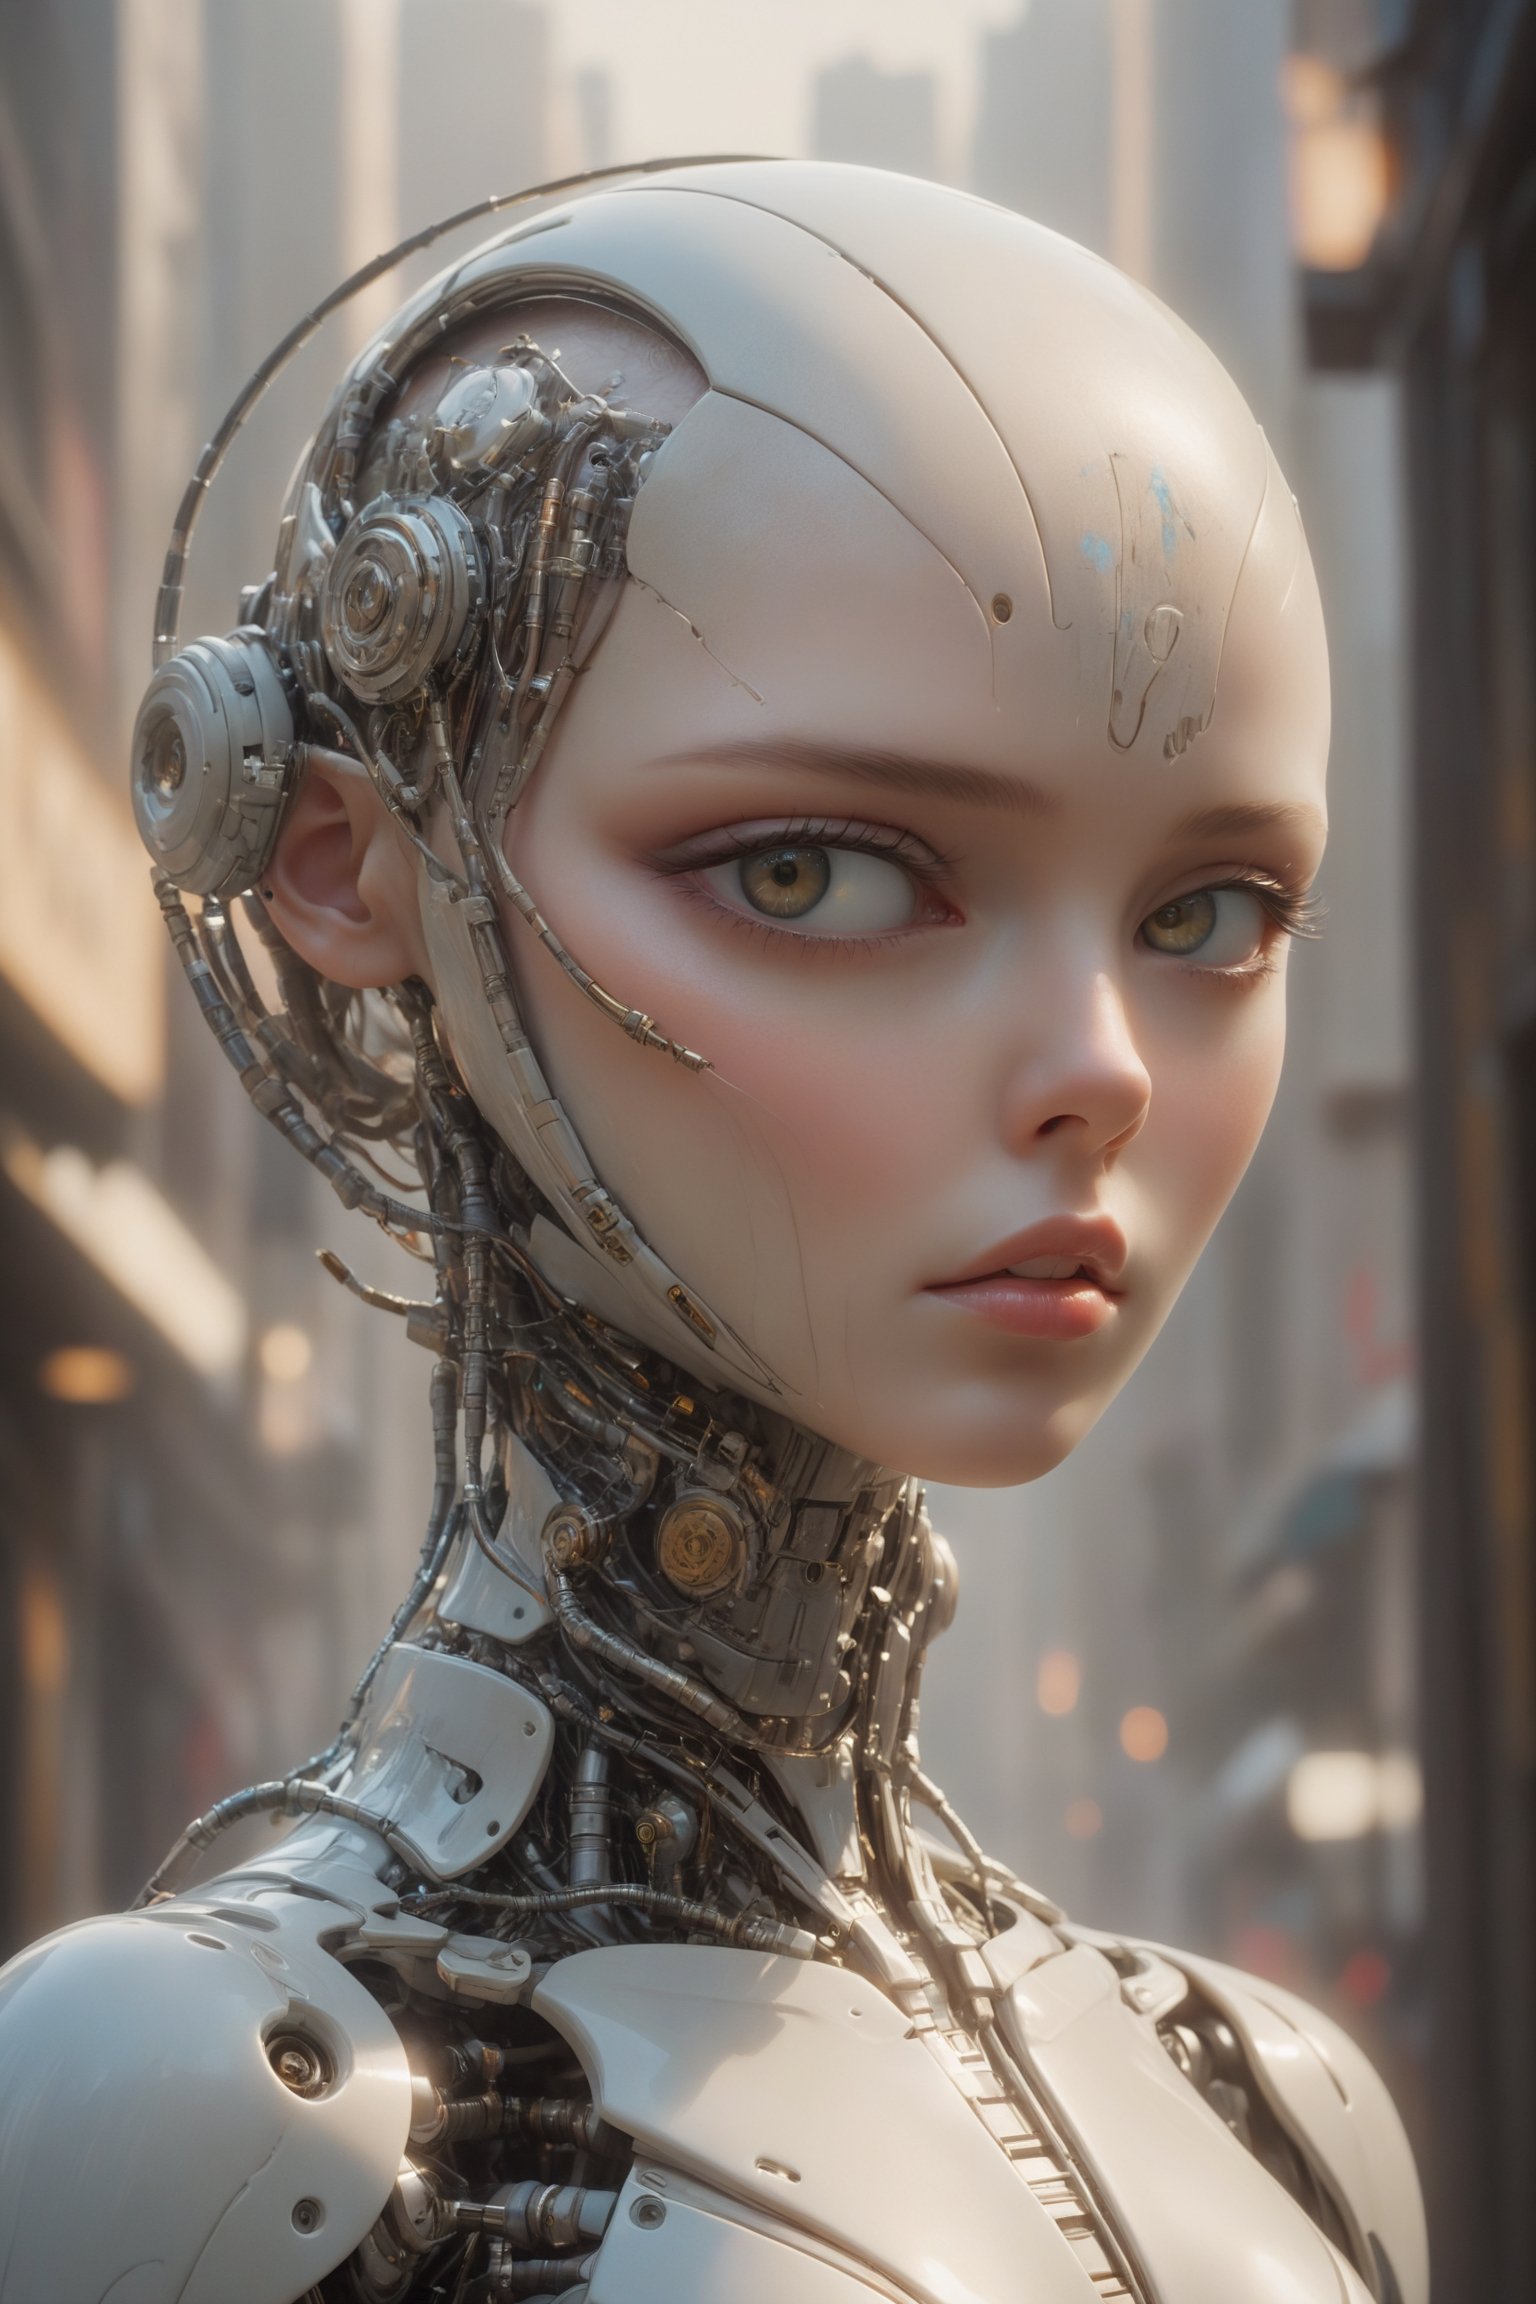 Masterpiece, {{{full_body}}}, {{{full_figure}}}, Oil painting of a beautiful female cyborg. straight on to camera,  bald head, small eyes, pale white skin with a rubbery plastic look, glistening, pearlescent skin. beautiful face, made to look almost human, but has an eerie quality, vacant eyes, luscious pouting lips, real human breasts, dreamlike, hyperrealistic, instanely detailled soft color, dreamlike, surrealism, plain graduated pale background, intricate details, 3D rendering, octane rendering. Art in pop surrealism lowbrow creepy cute style. Inspired by Ray Caesar. Vintage art, ((art deco background)), opaque colors, light grain, indirect lighting, aesthetic portrait, DonMCyb3rN3cr0XL,cyborg,science fiction,close up